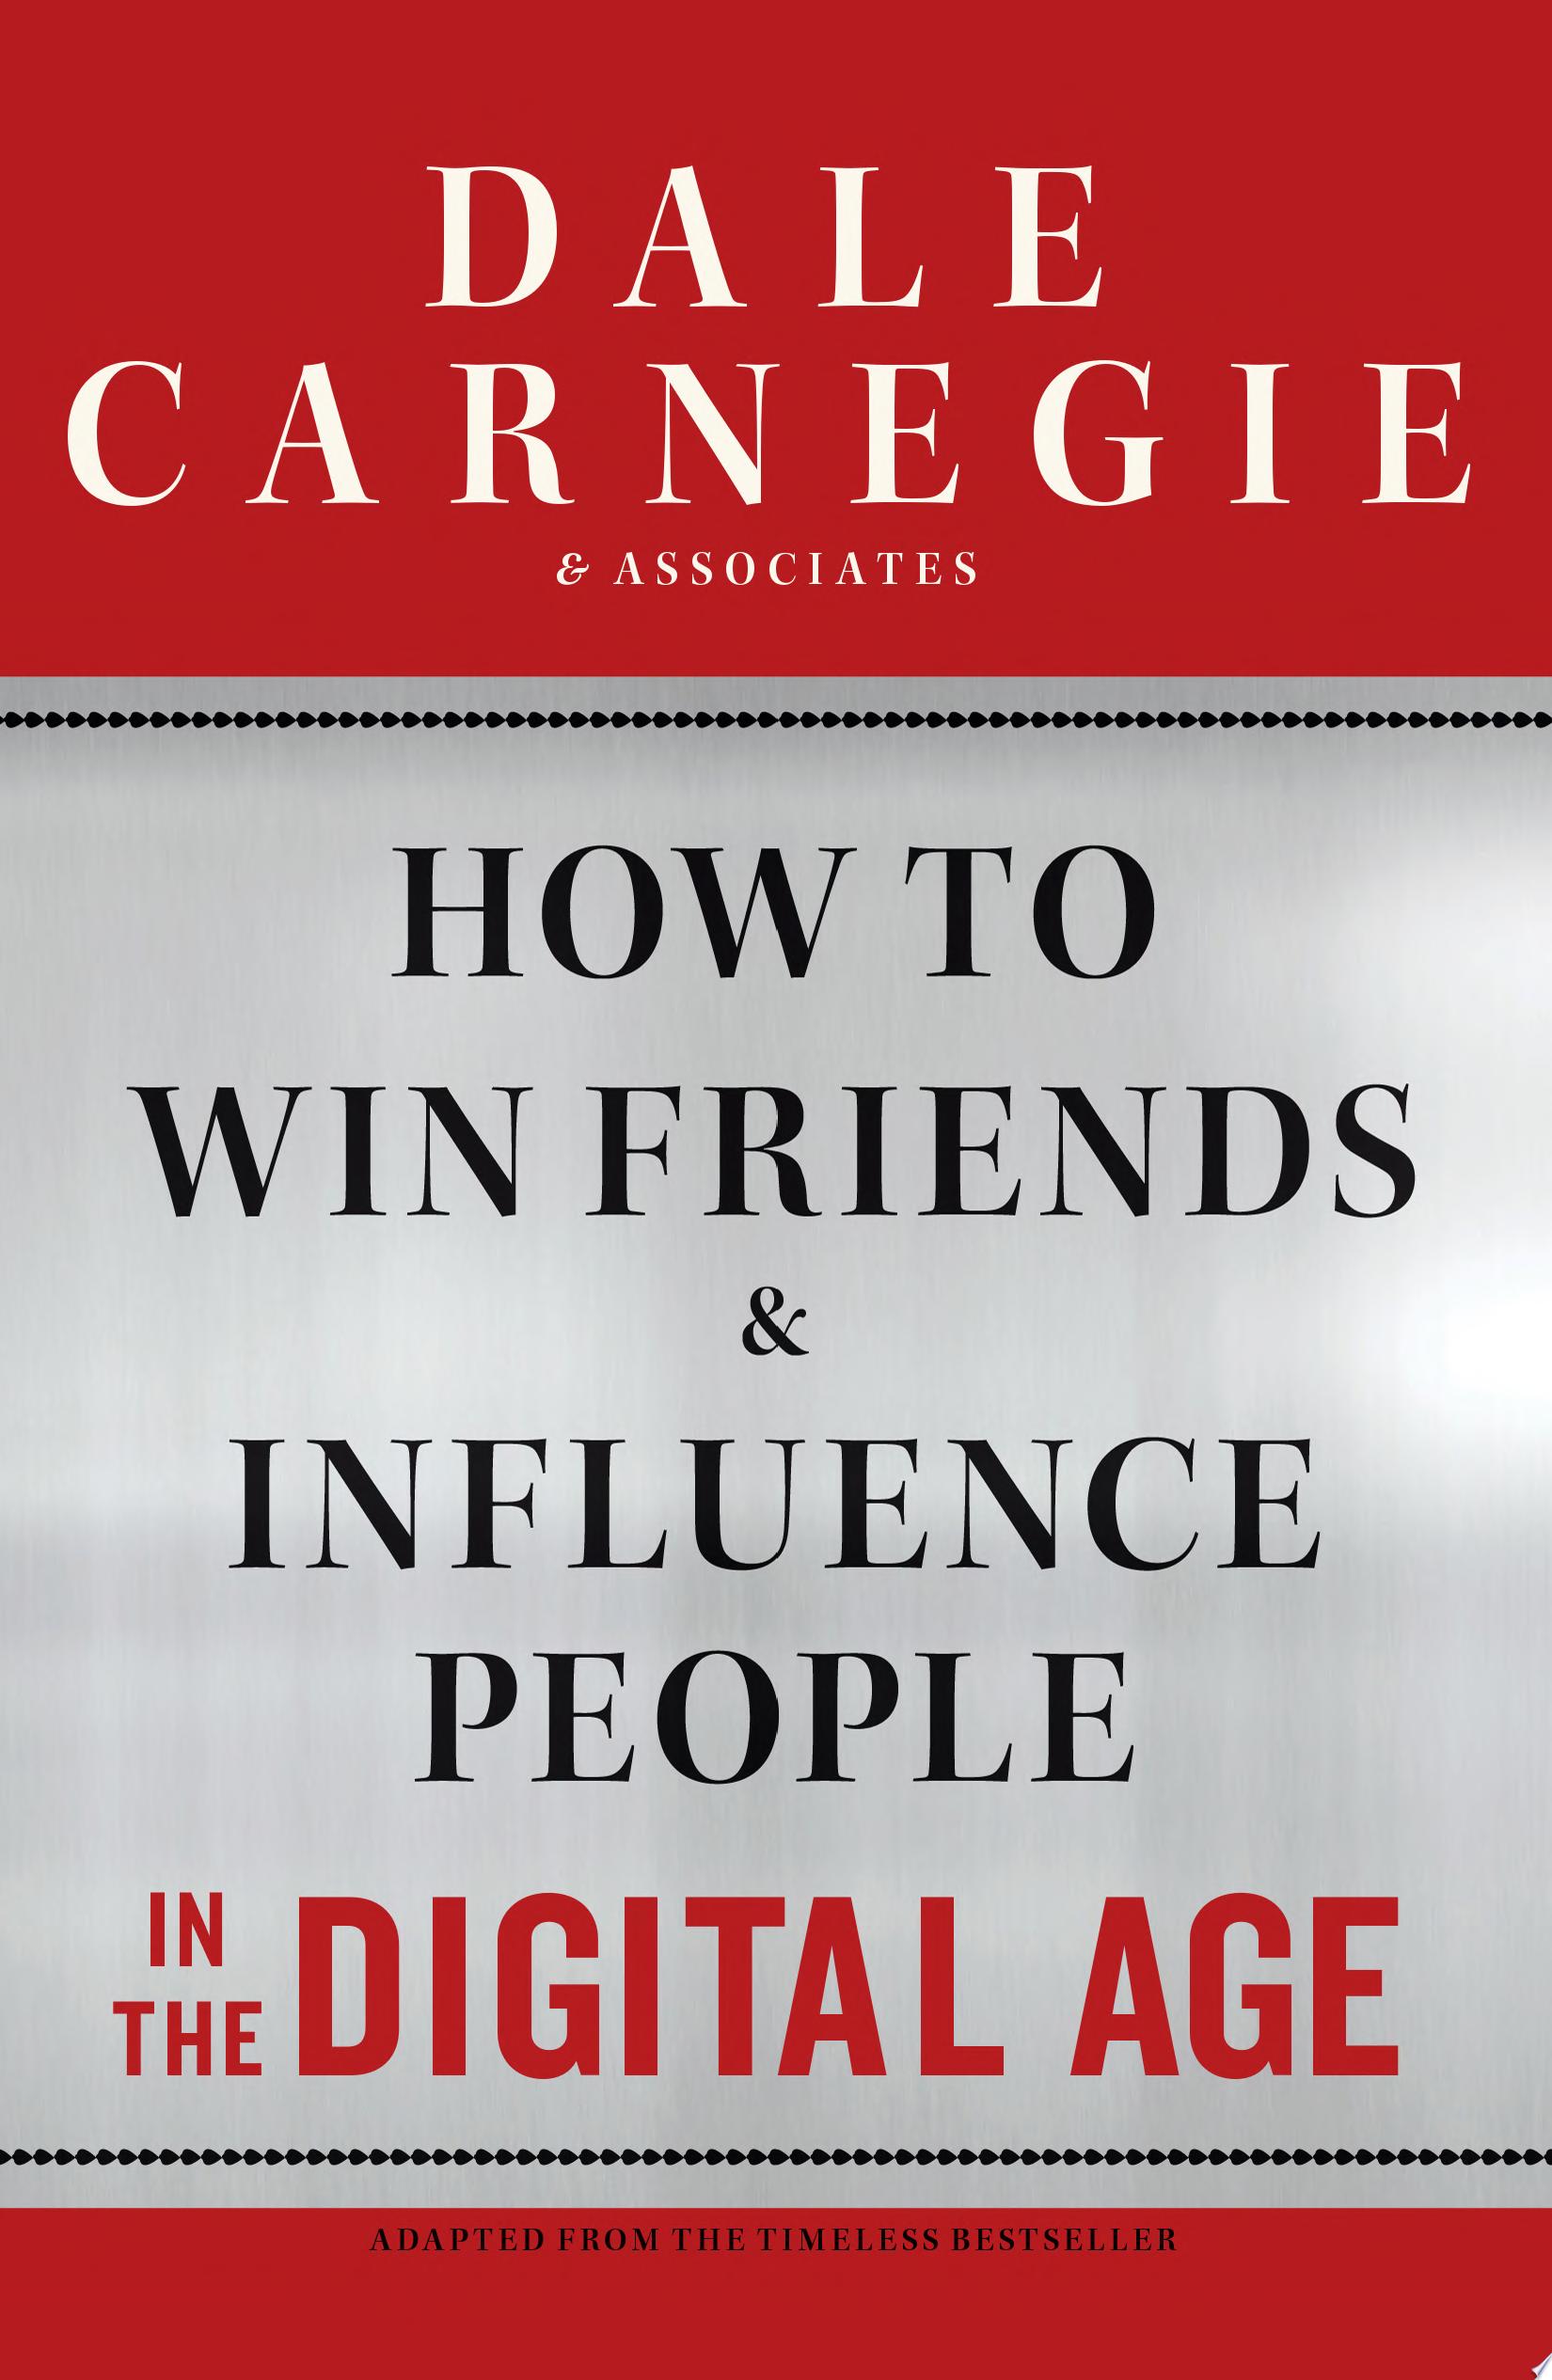 Image for "How to Win Friends and Influence People in the Digital Age"